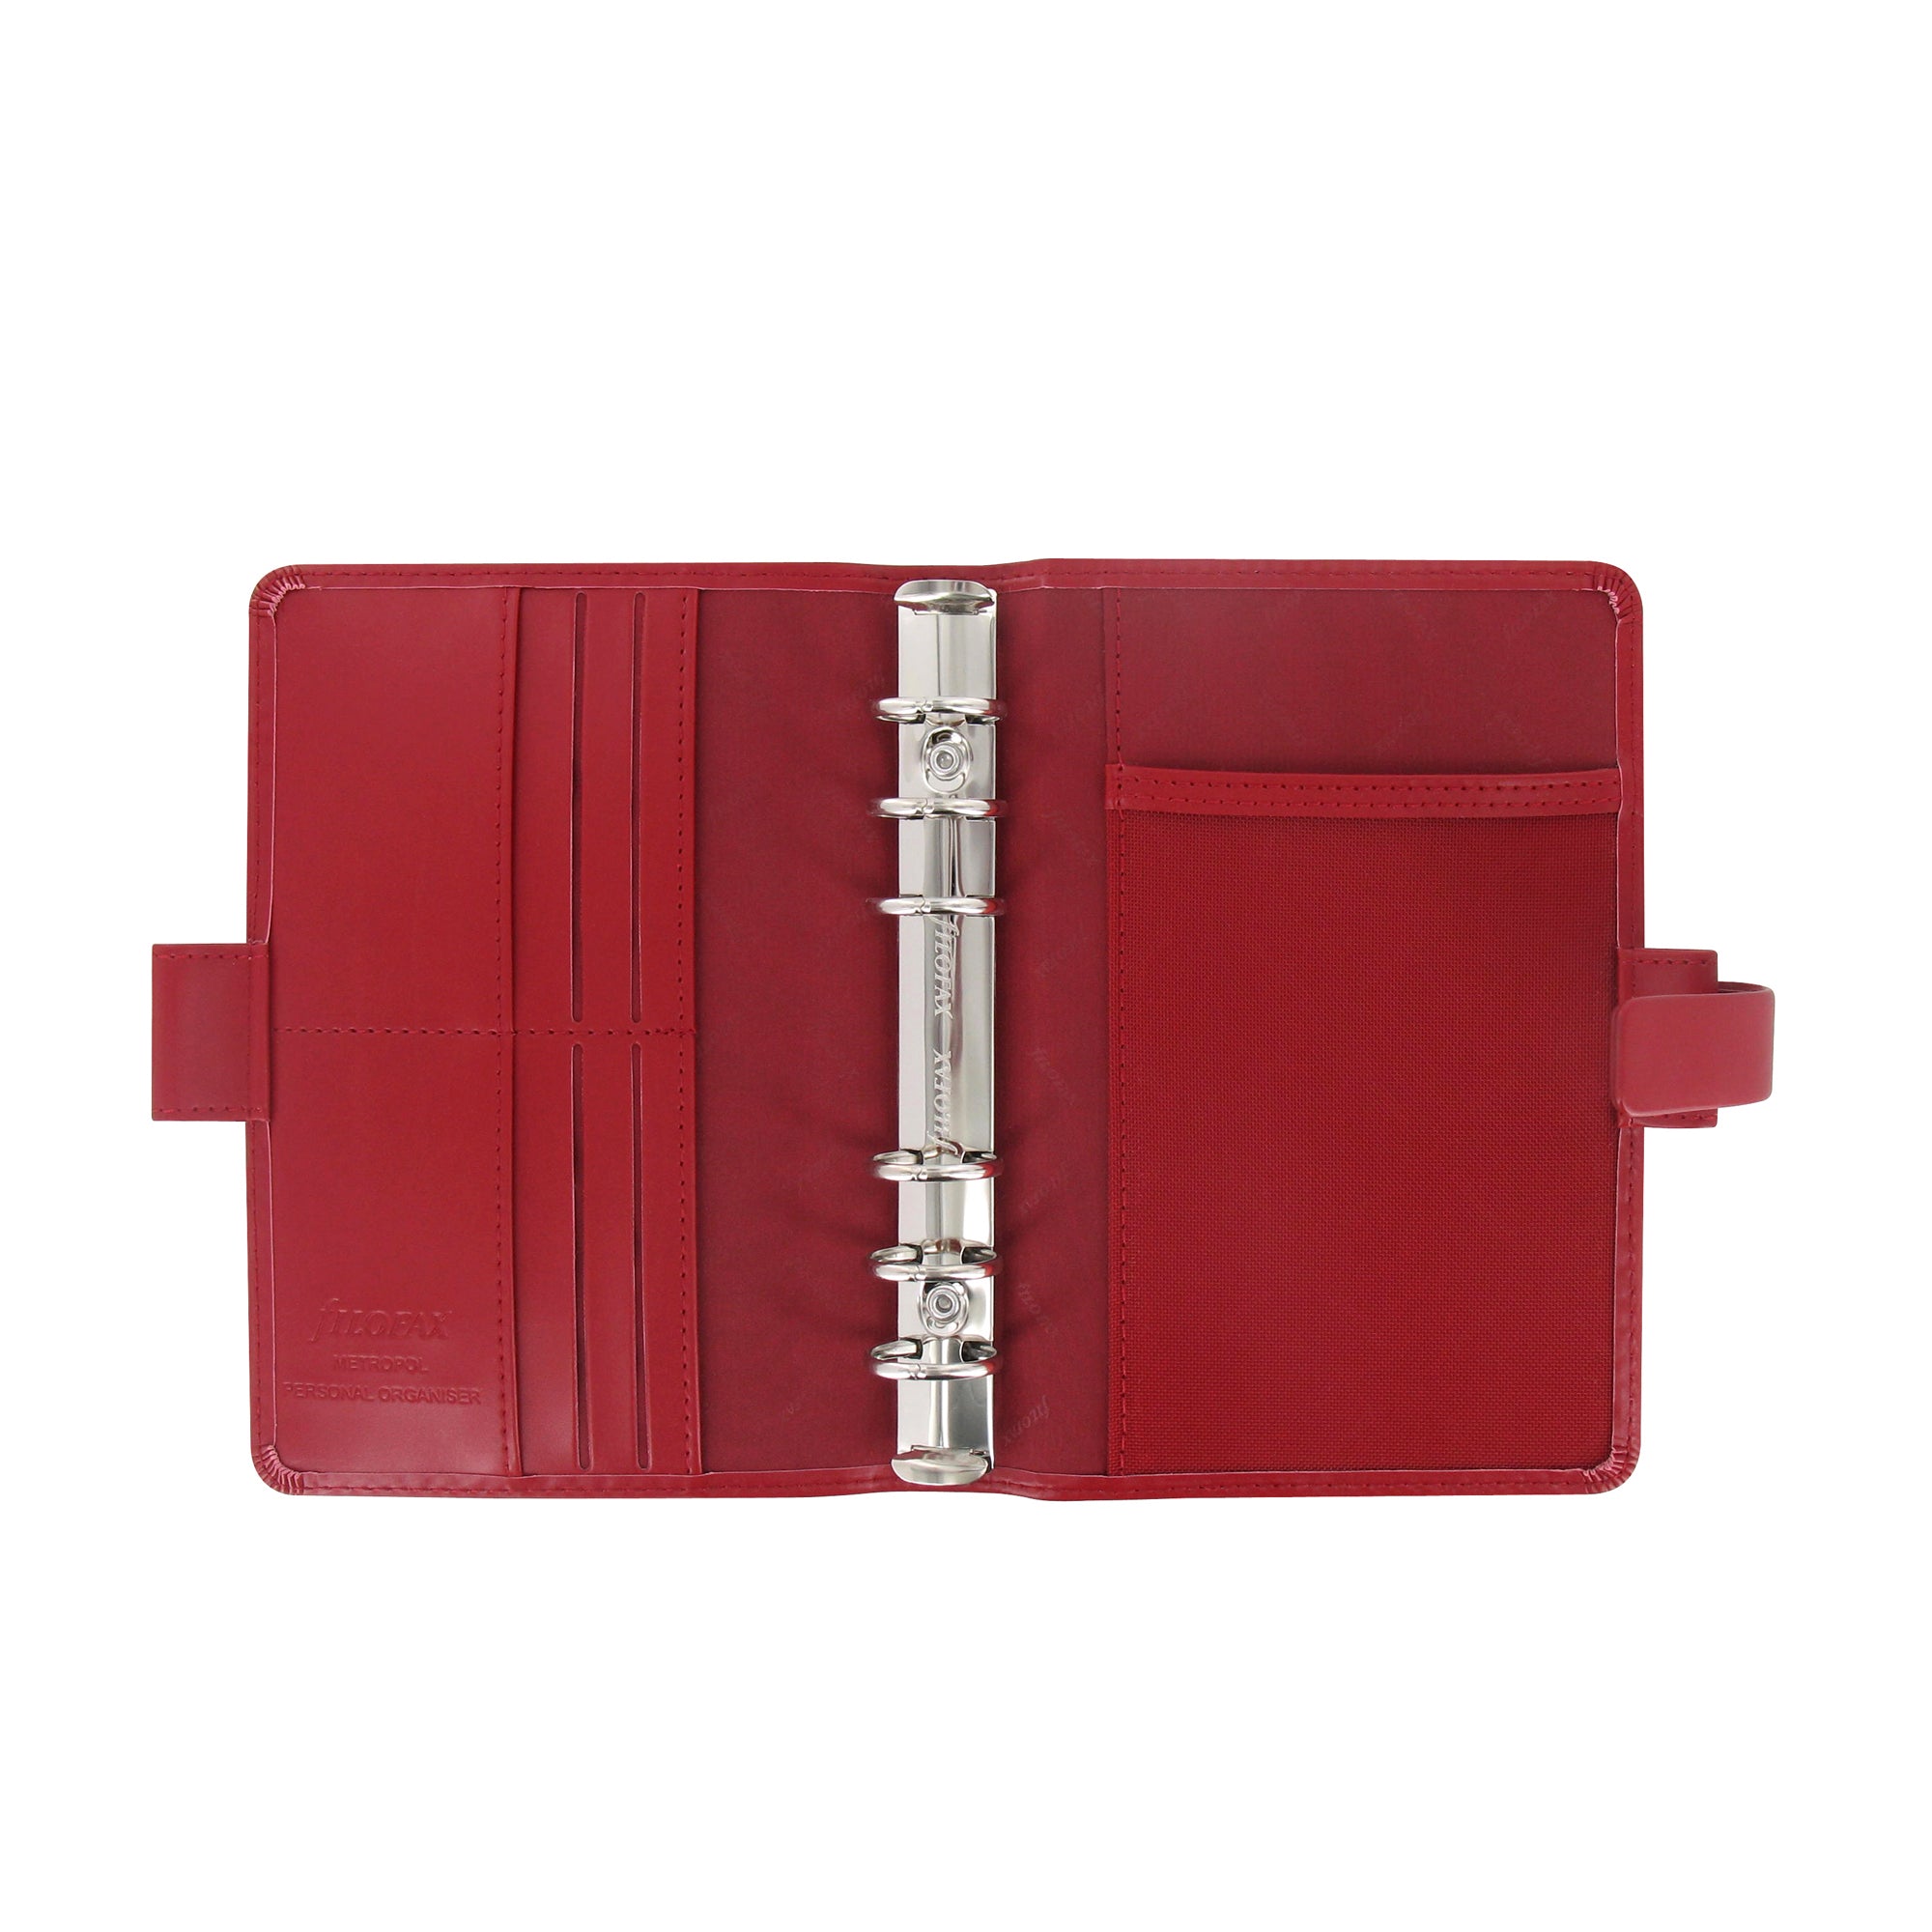 filofax-organiser-metropol-personal-f-to-188x135x38mm-rosso-similpelle